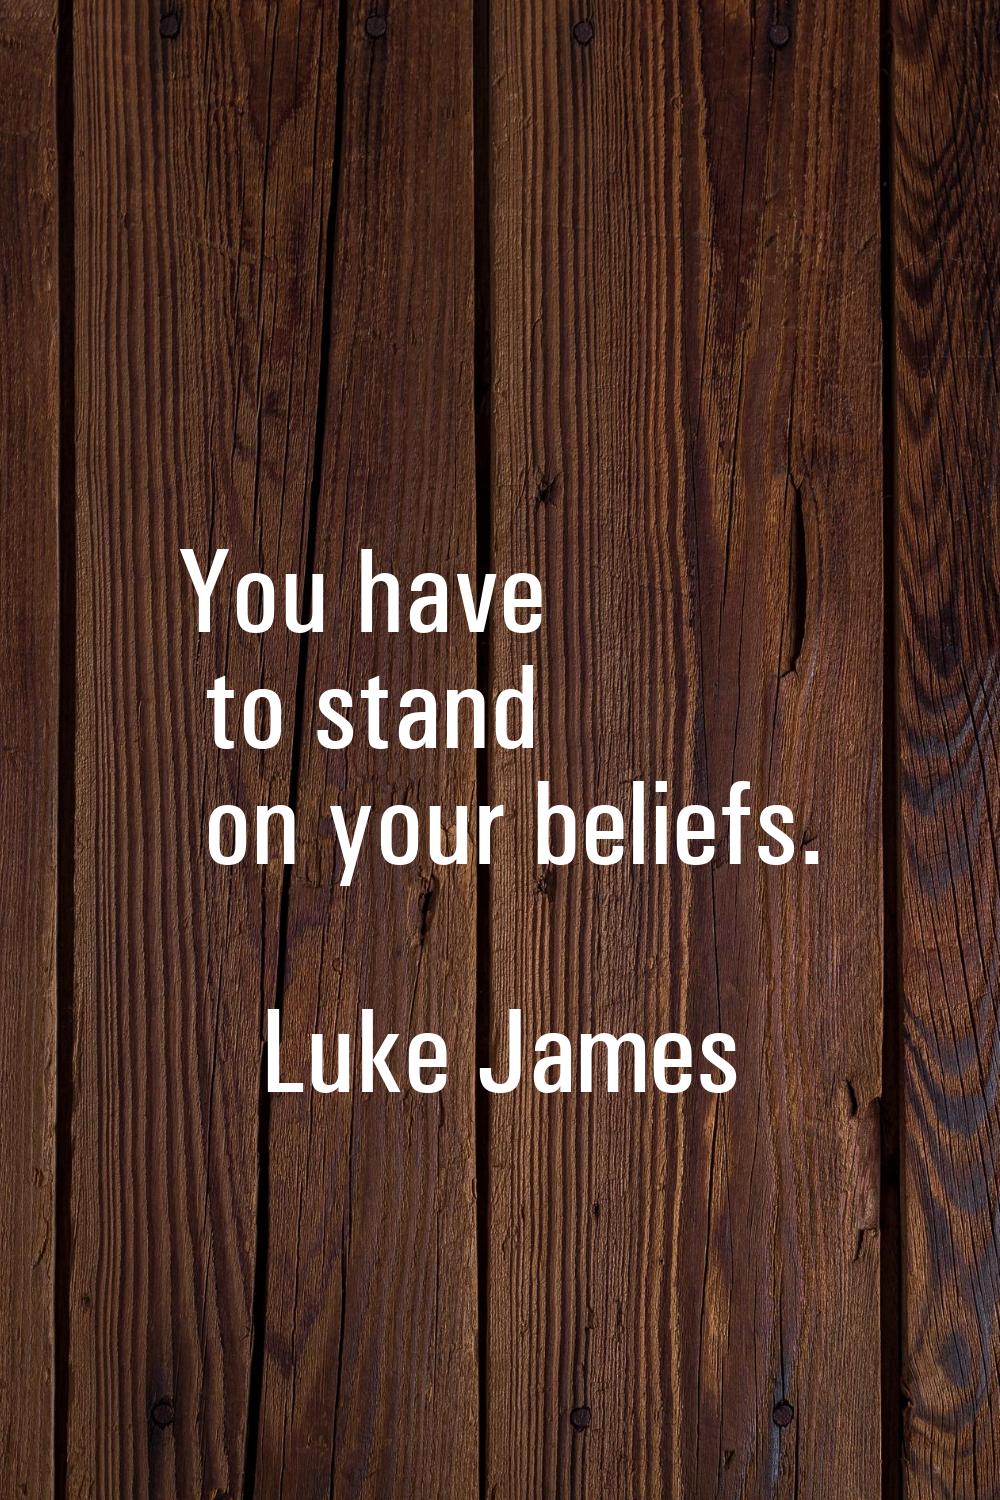 You have to stand on your beliefs.